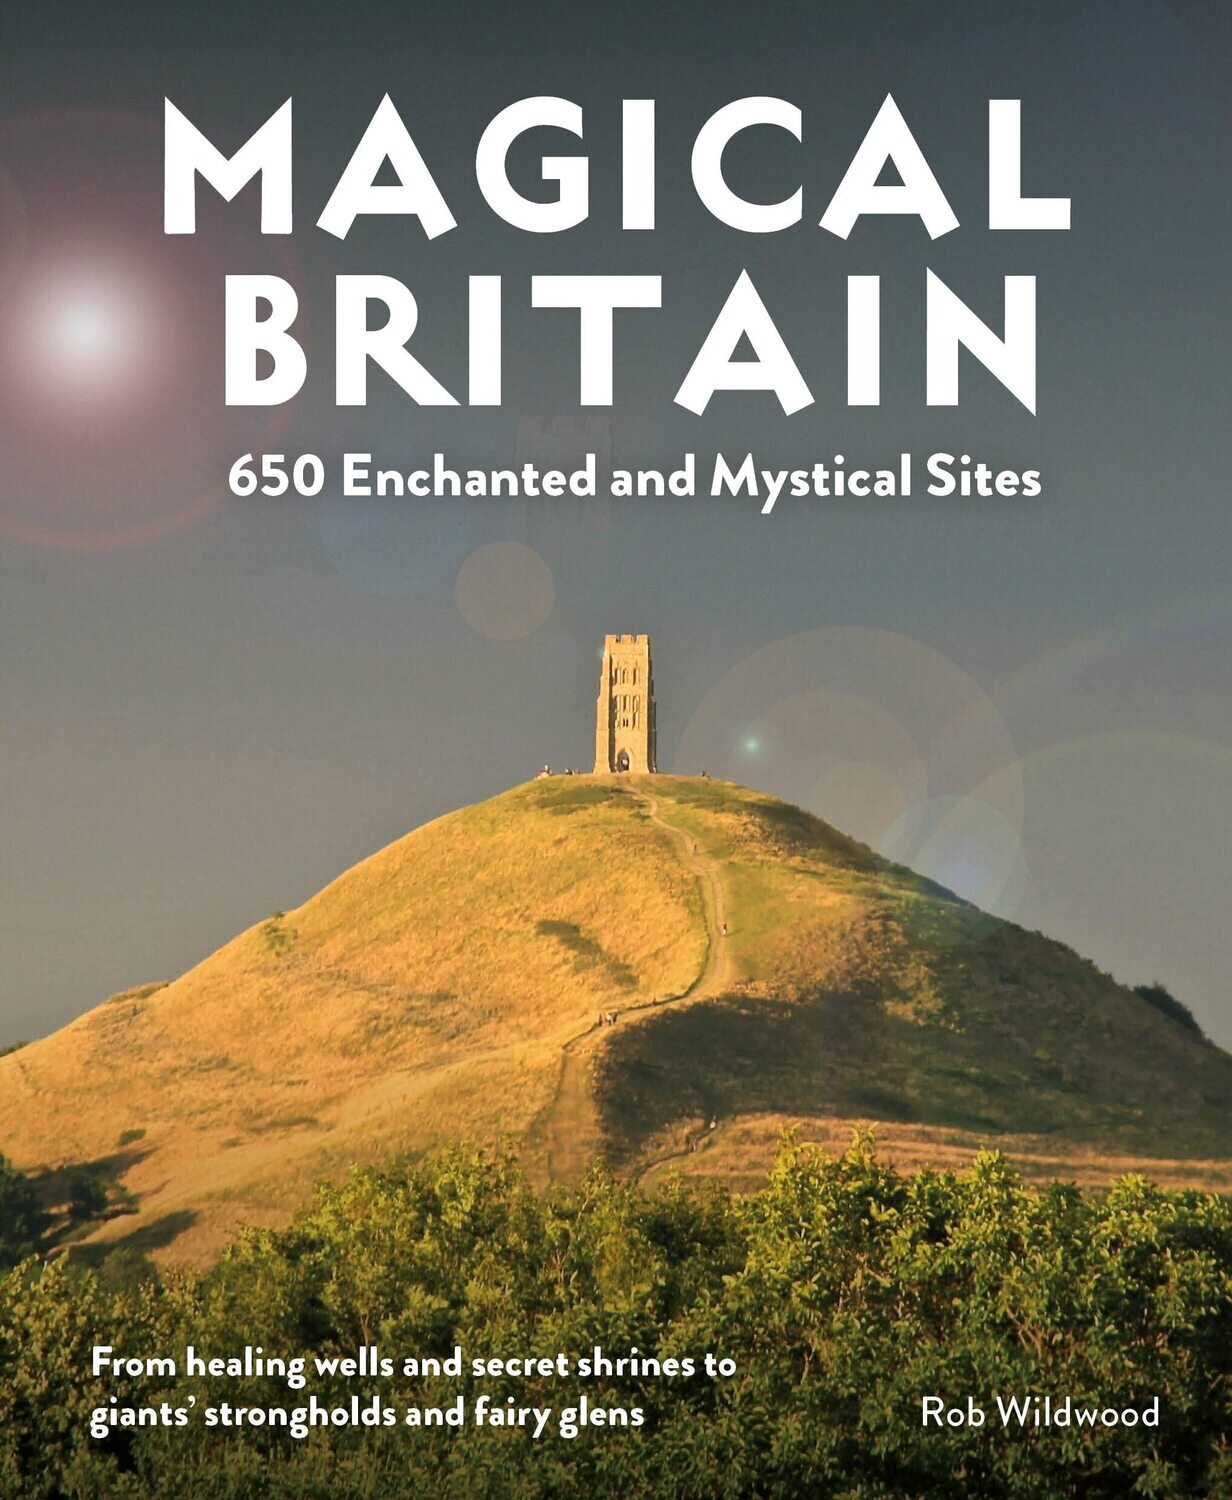 Magical Britain: 650 Enchanted and Mystical Sites - From healing wells and secret shrines to giants’ strongholds and fairy glens